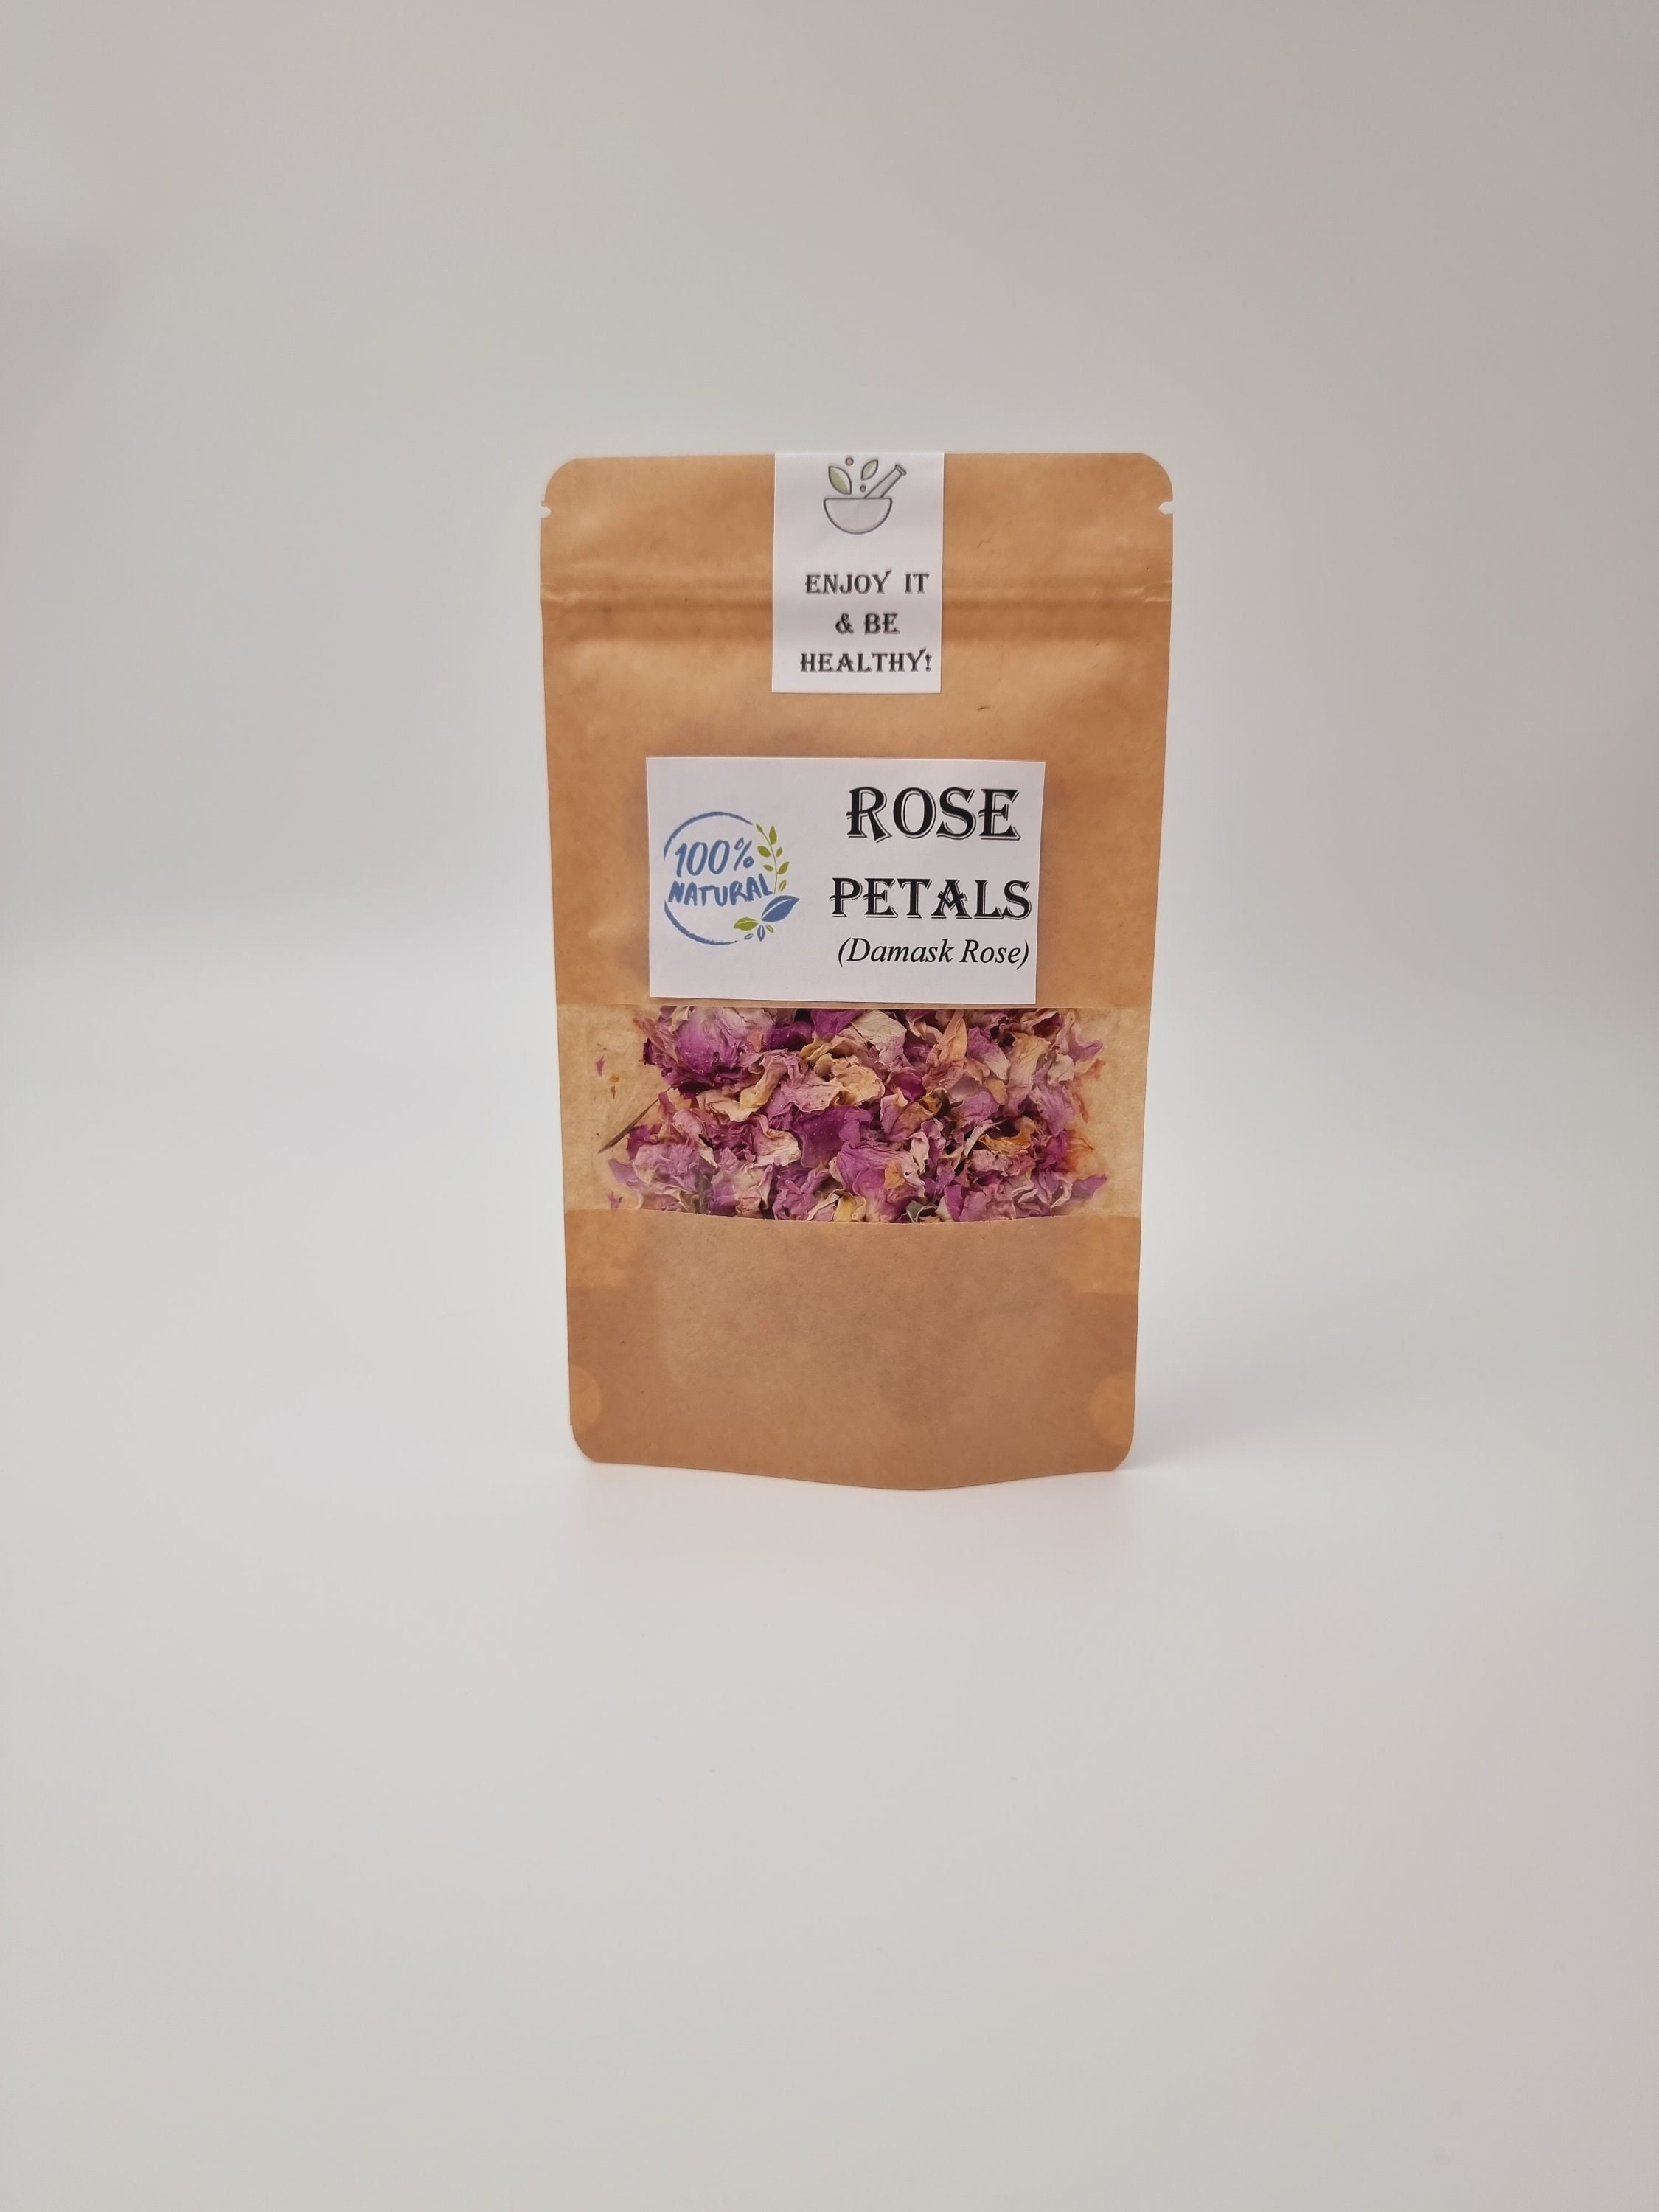 Red Rose Buds & Petals Organic Dried Herbs Dried Red Rose Petals Herbalism  Rose Water Aromatherapy Altar Supply Herbal Teas 